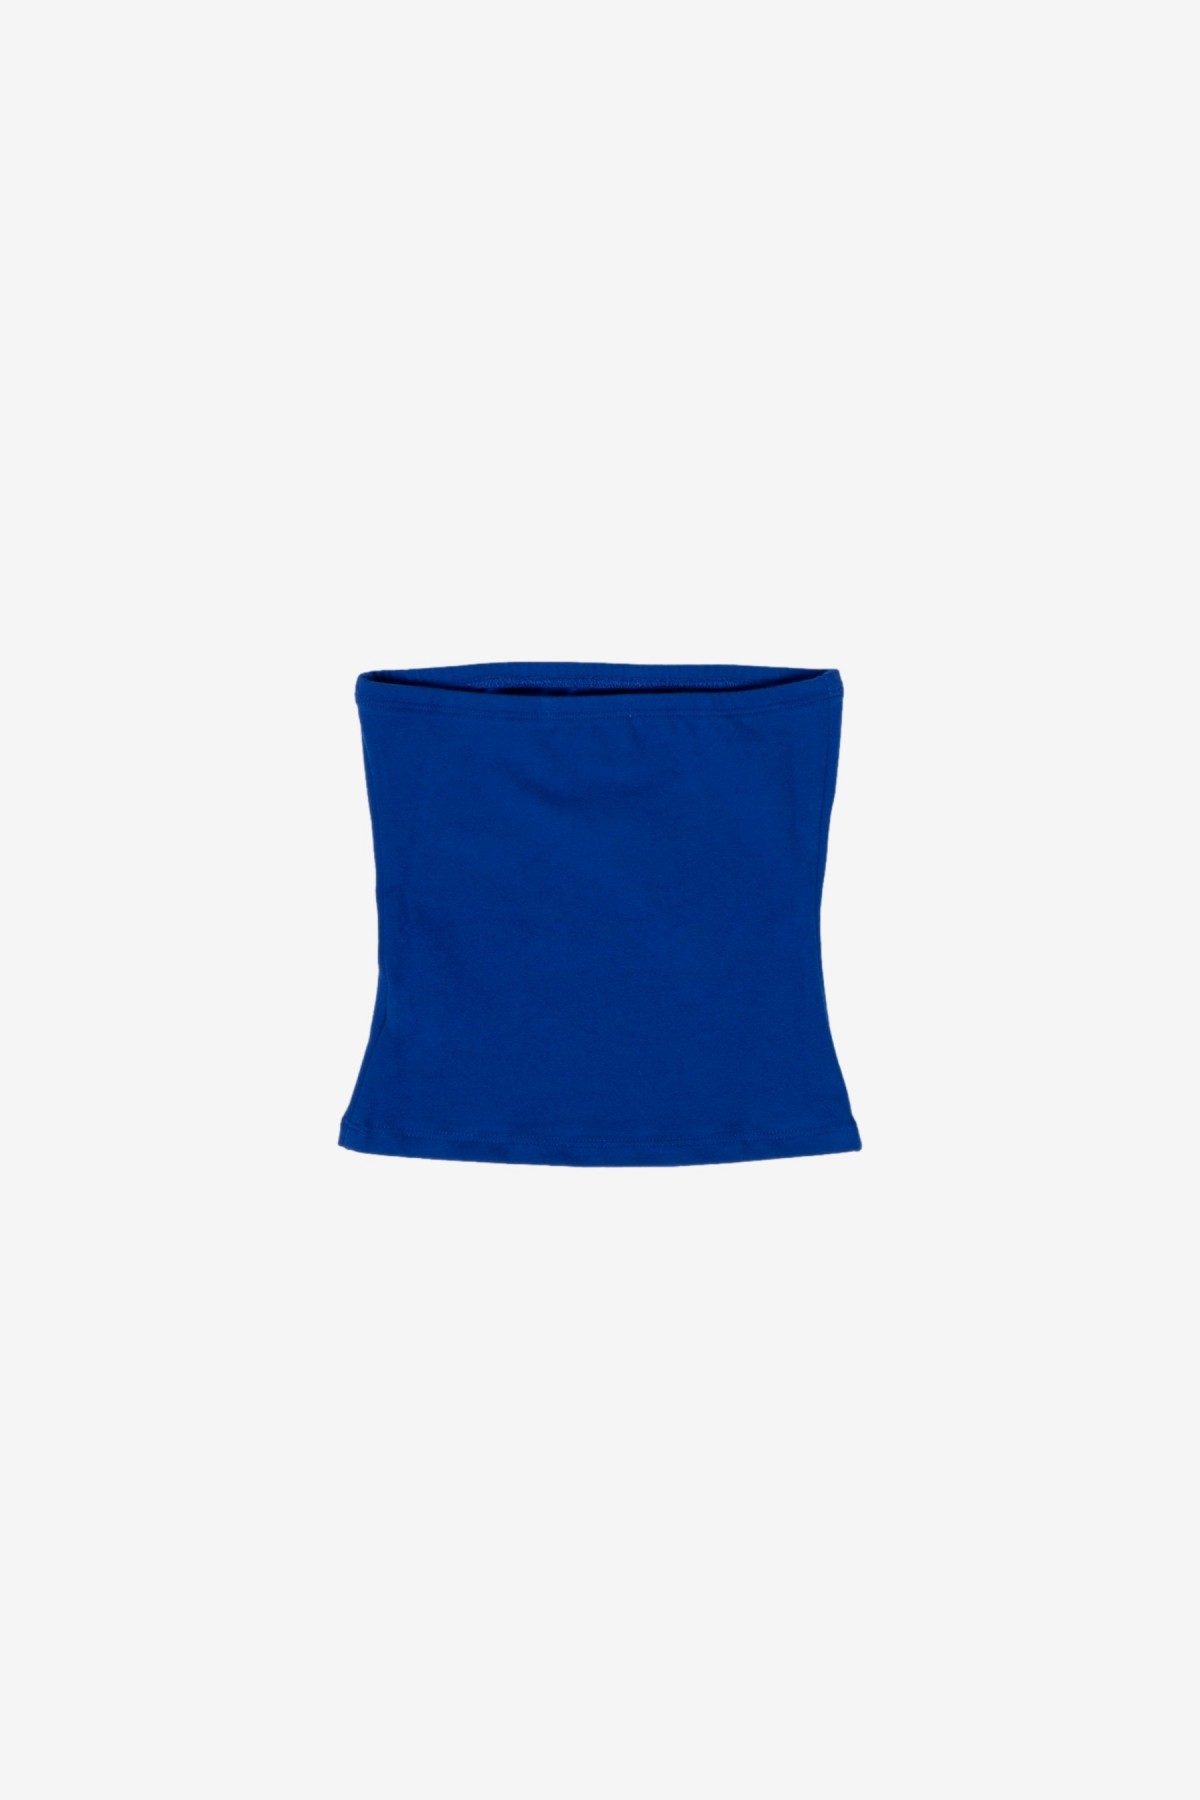 Gil Rodriguez The Tube Convertible Top in Lapis